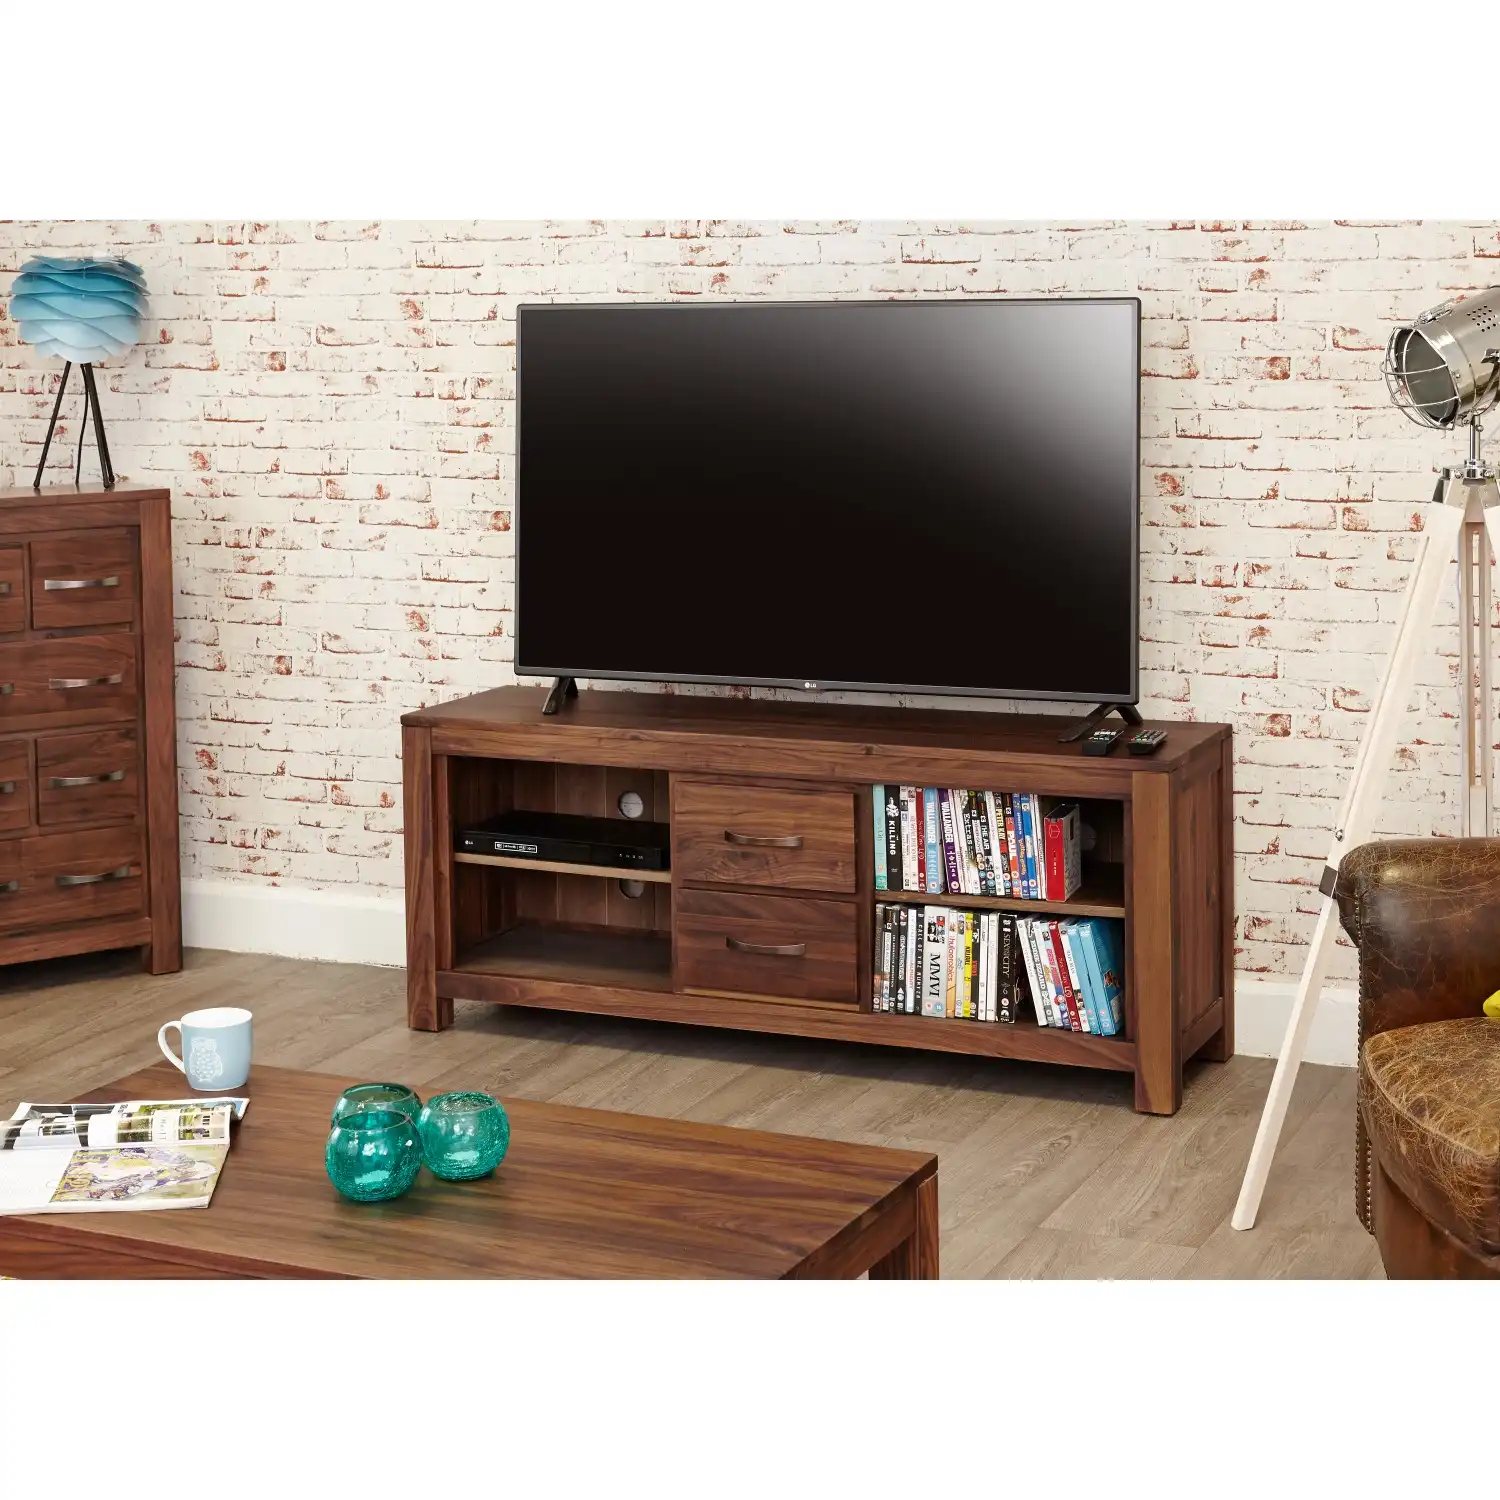 Solid Walnut Widescreen TV Cabinet with 2 Drawers 4 Open Shelves